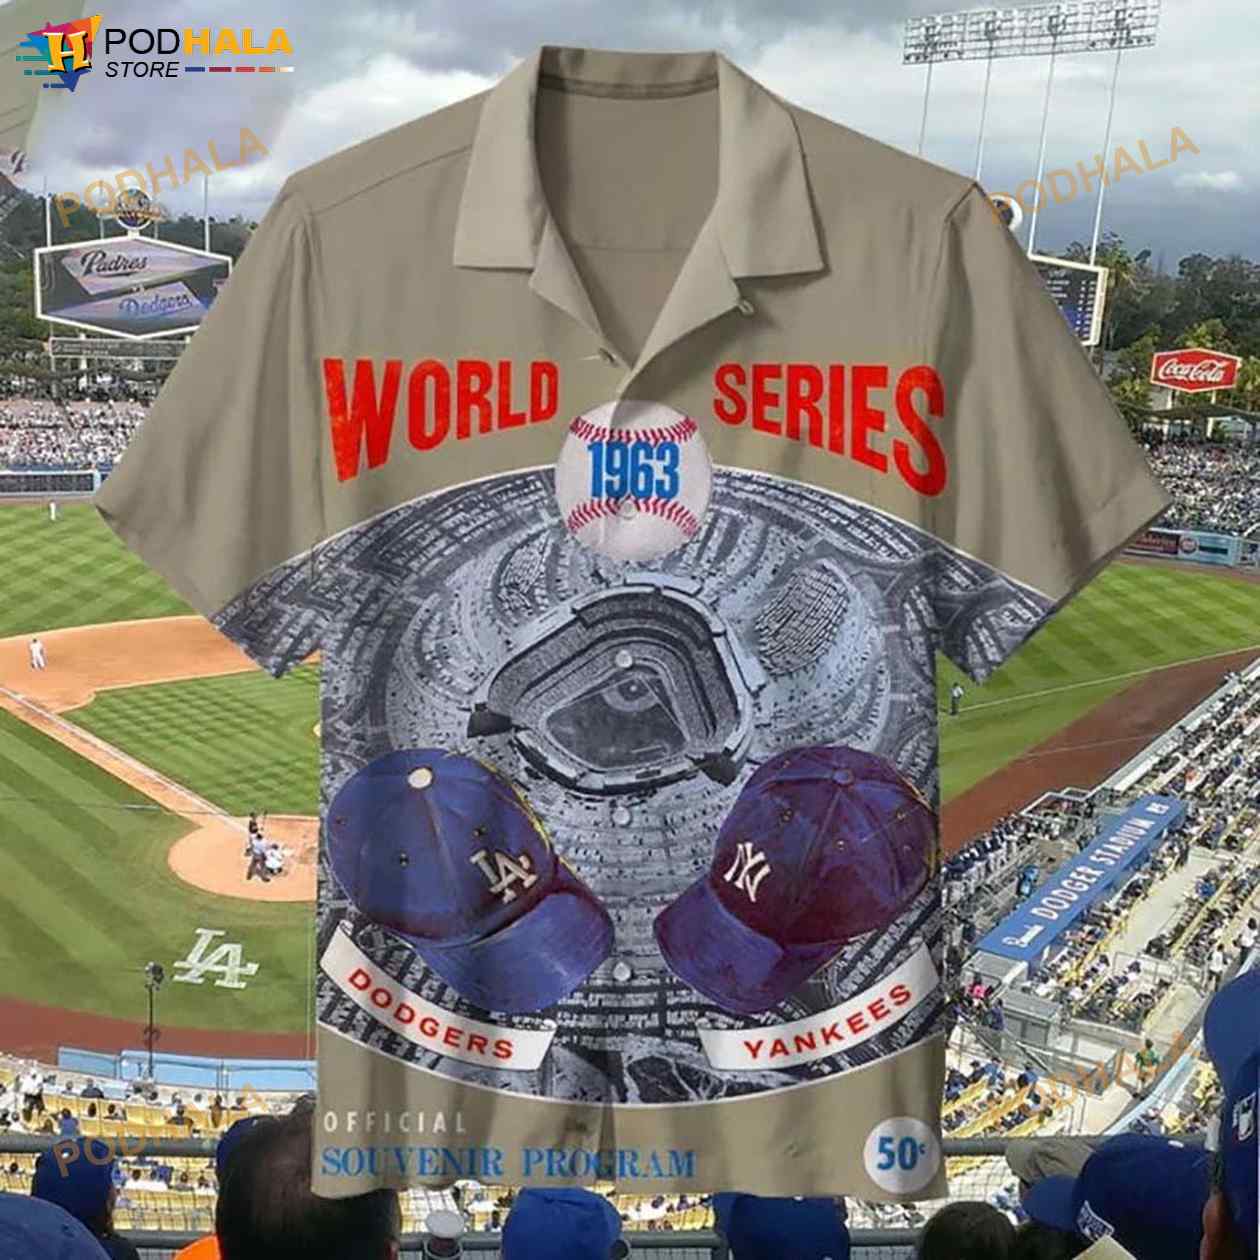 Los Angeles Dodgers MLB Custom Name Hawaiian Shirt For Men And Women Best  Gift For Fans